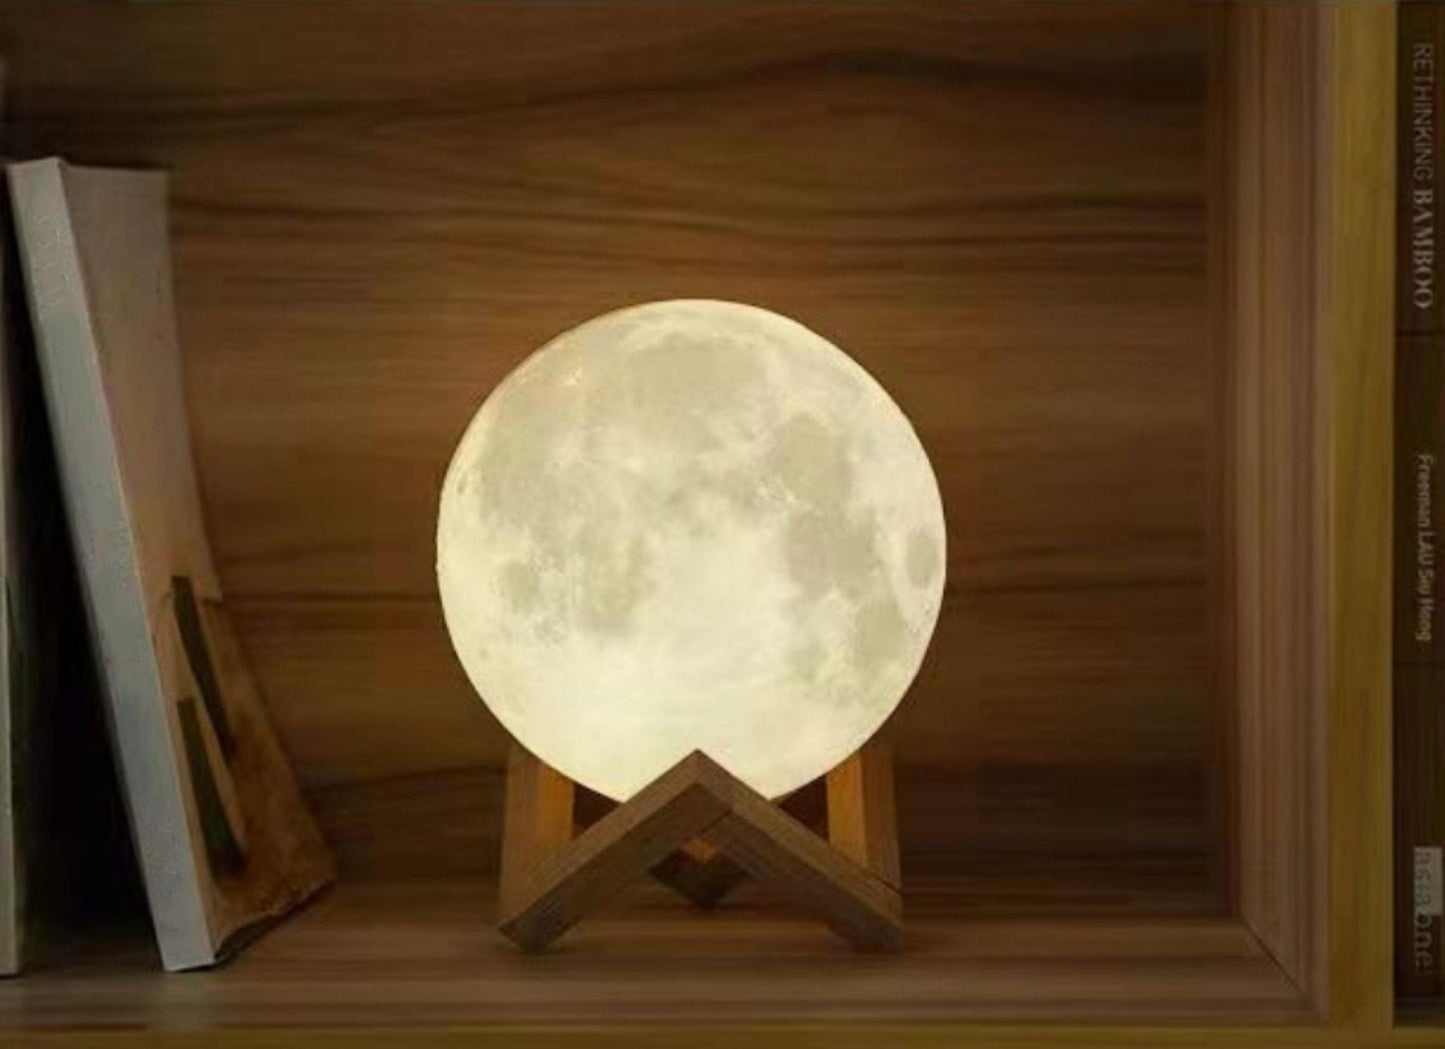 3D Printed Minimalist Moon Lamp - Space Mesmerise - Space Gifts | Lamps | Statues | Home Decor